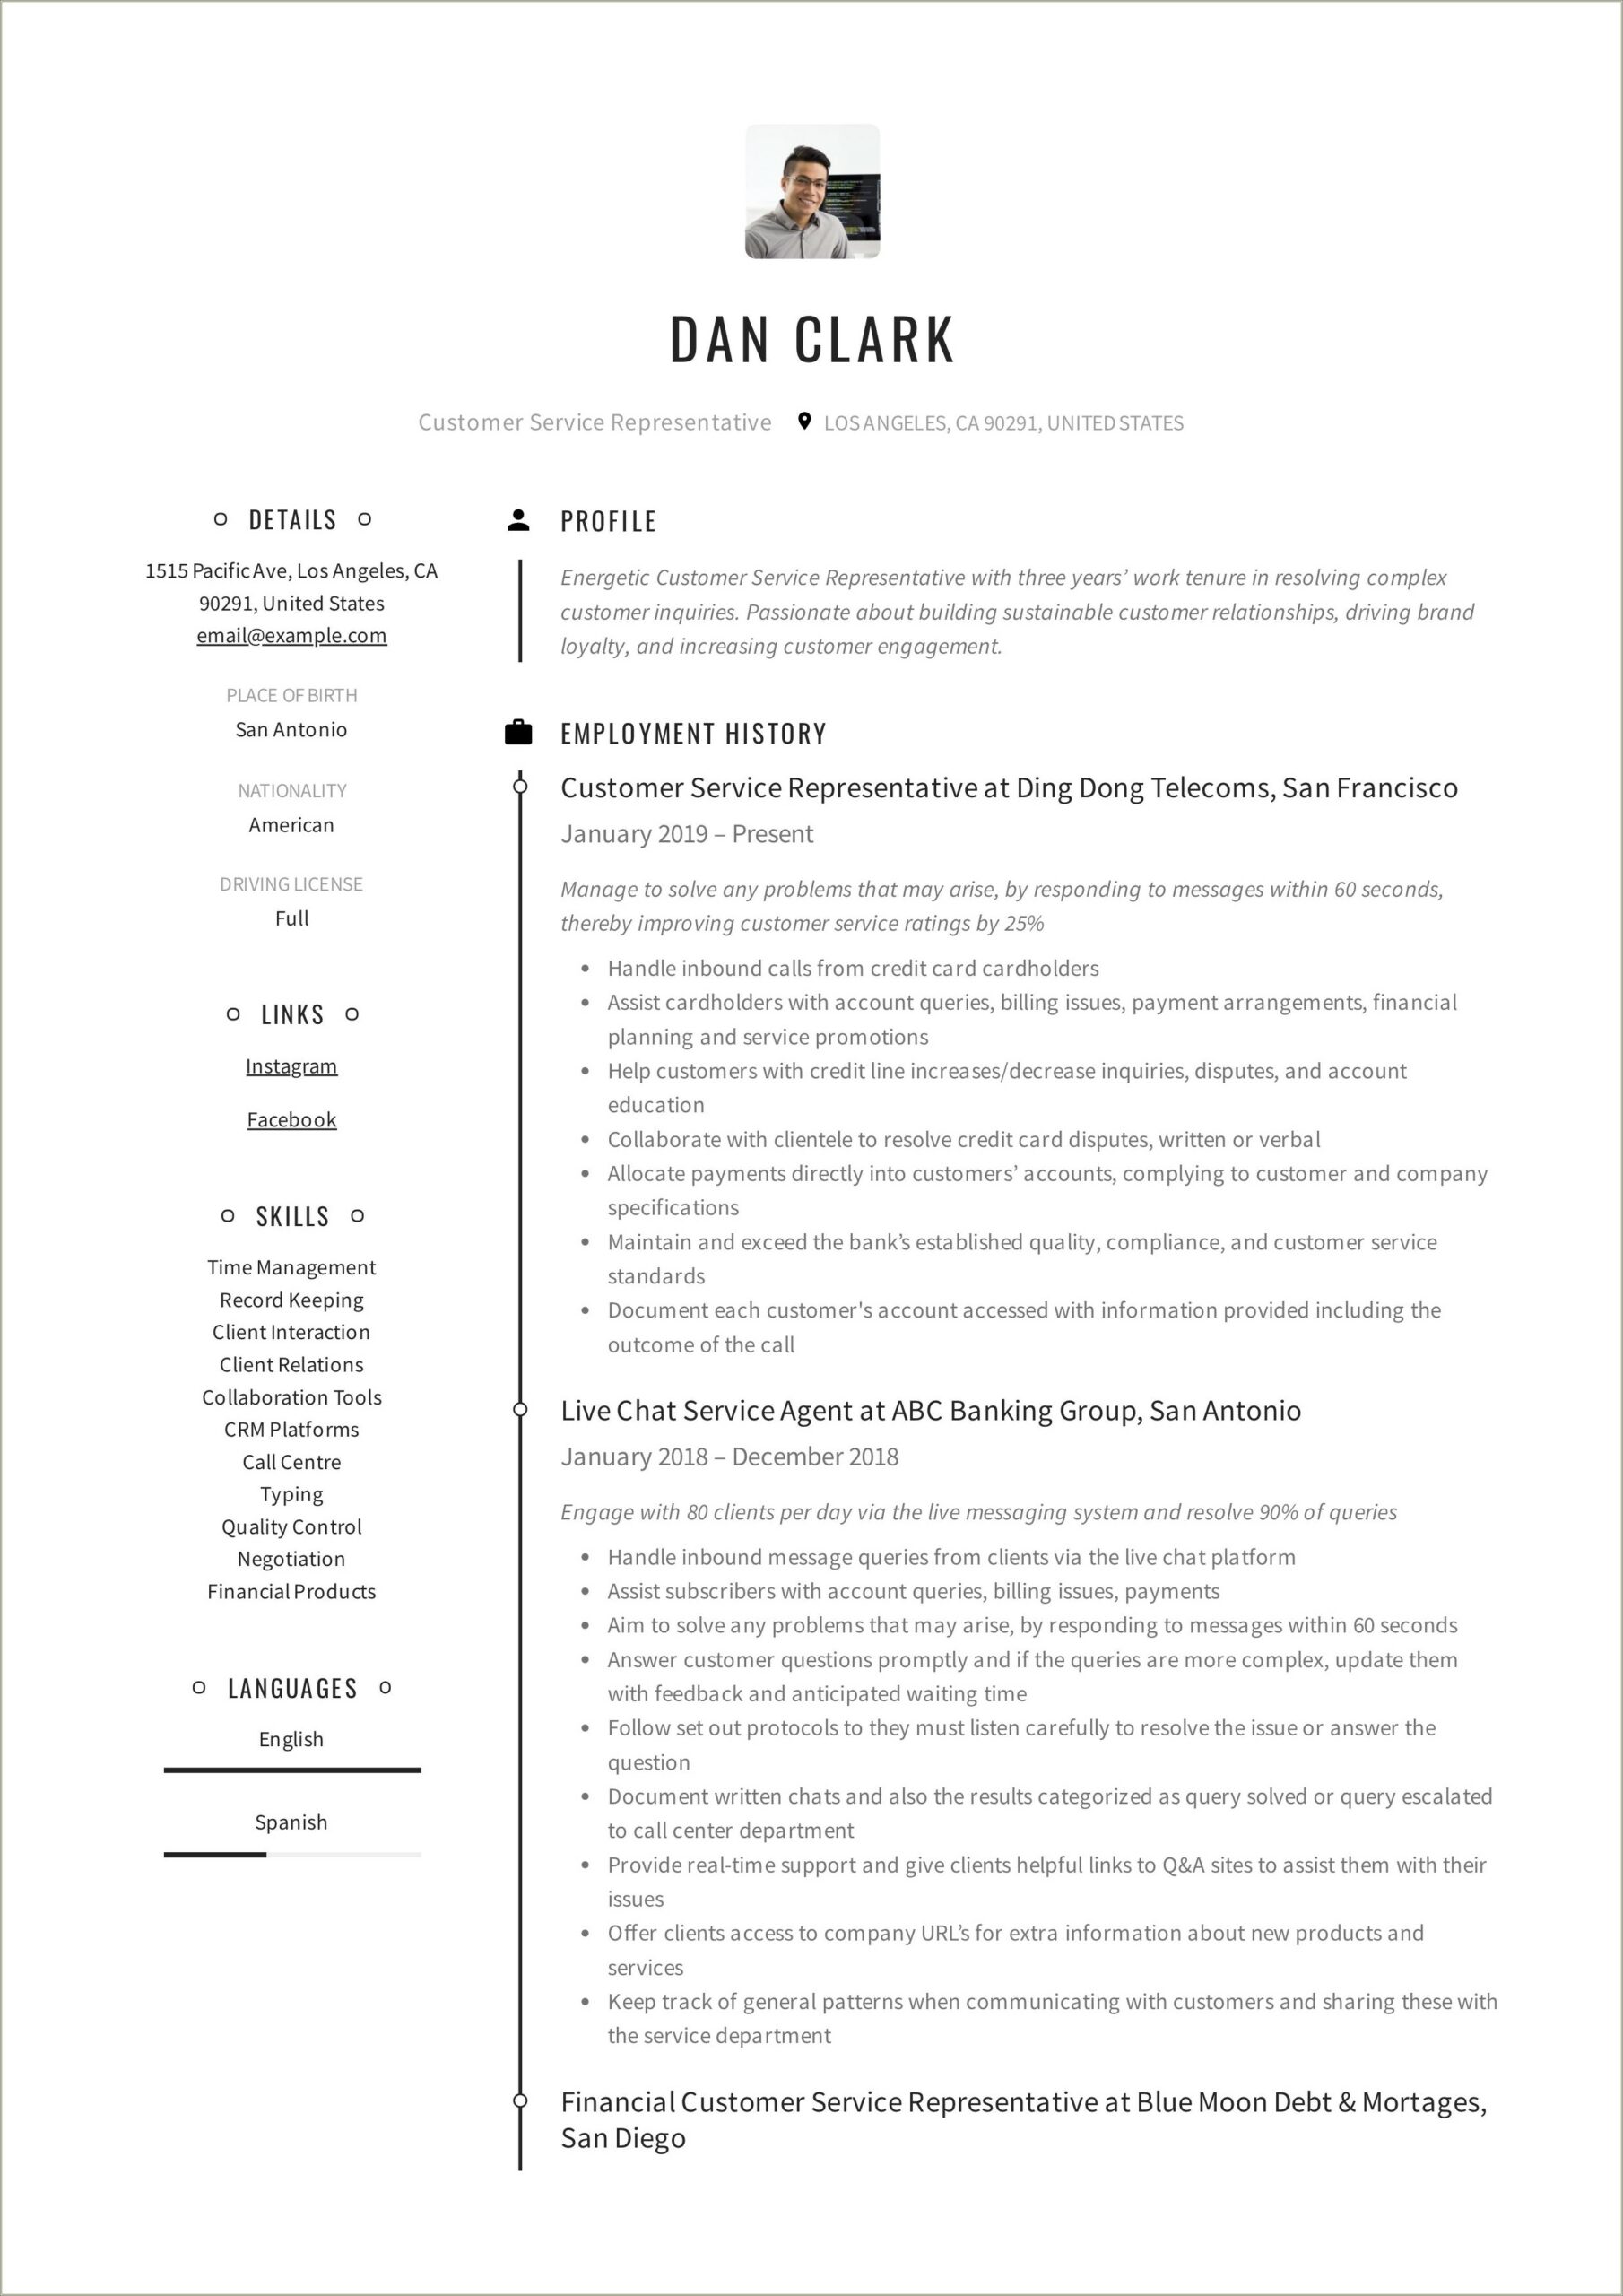 Resume Sales Wording Engaged With Customers